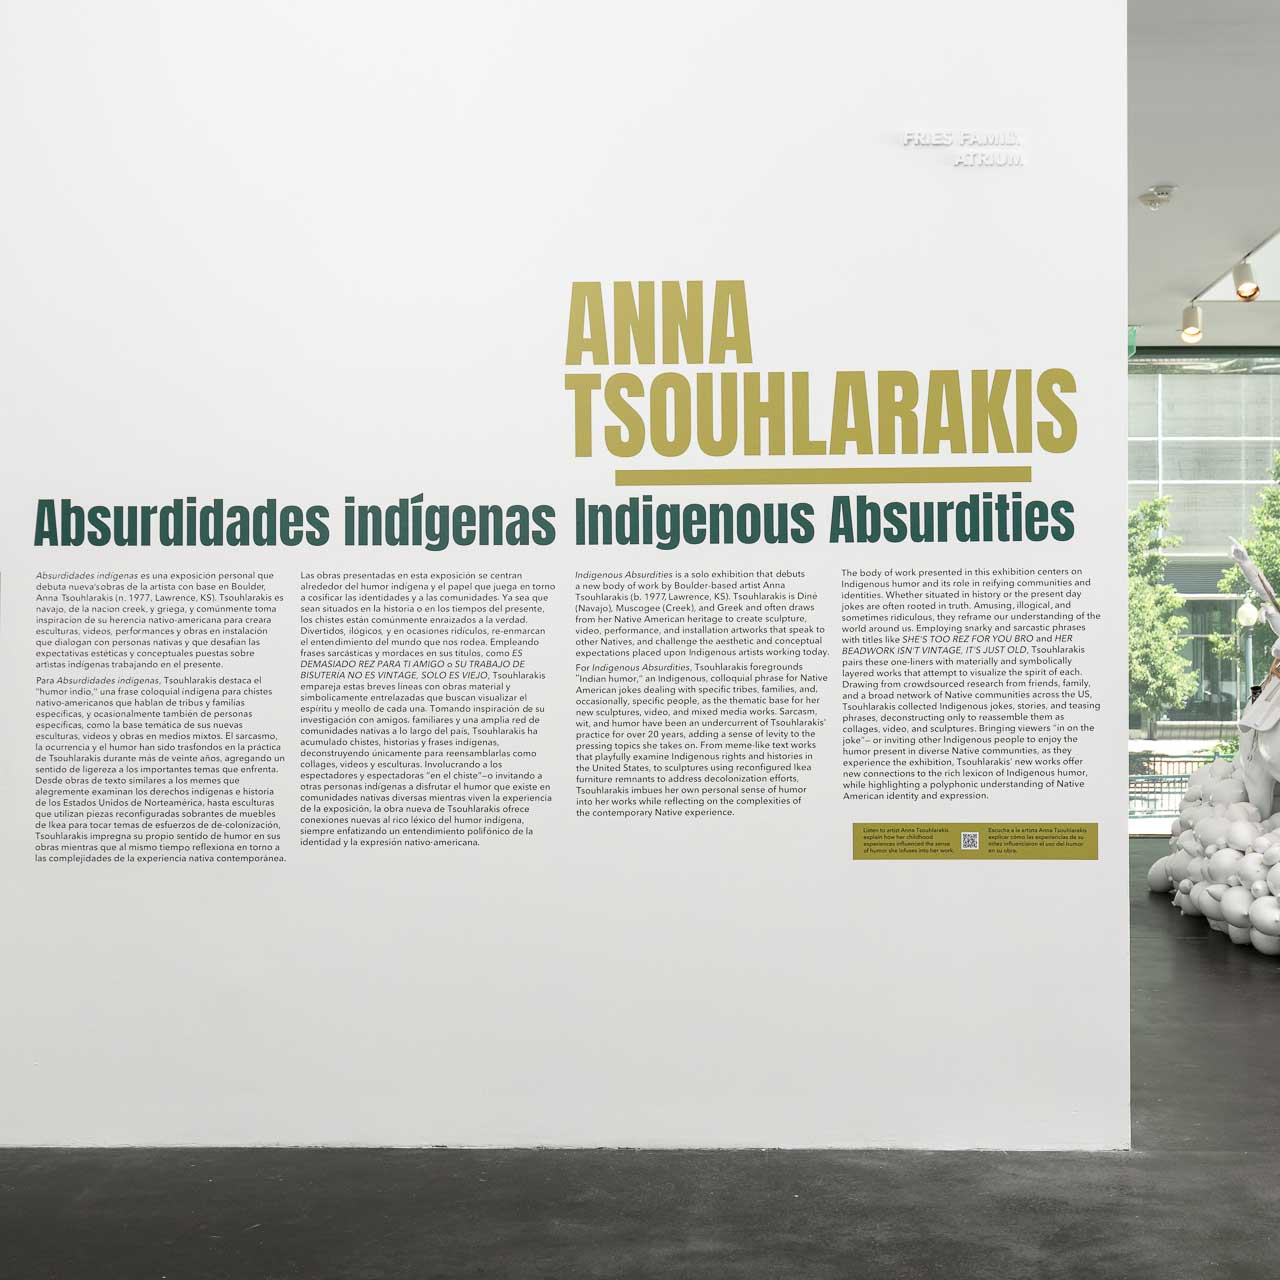 Wall text that reads, "Anna Tsouhlarakis: Indigenous Absurdities".